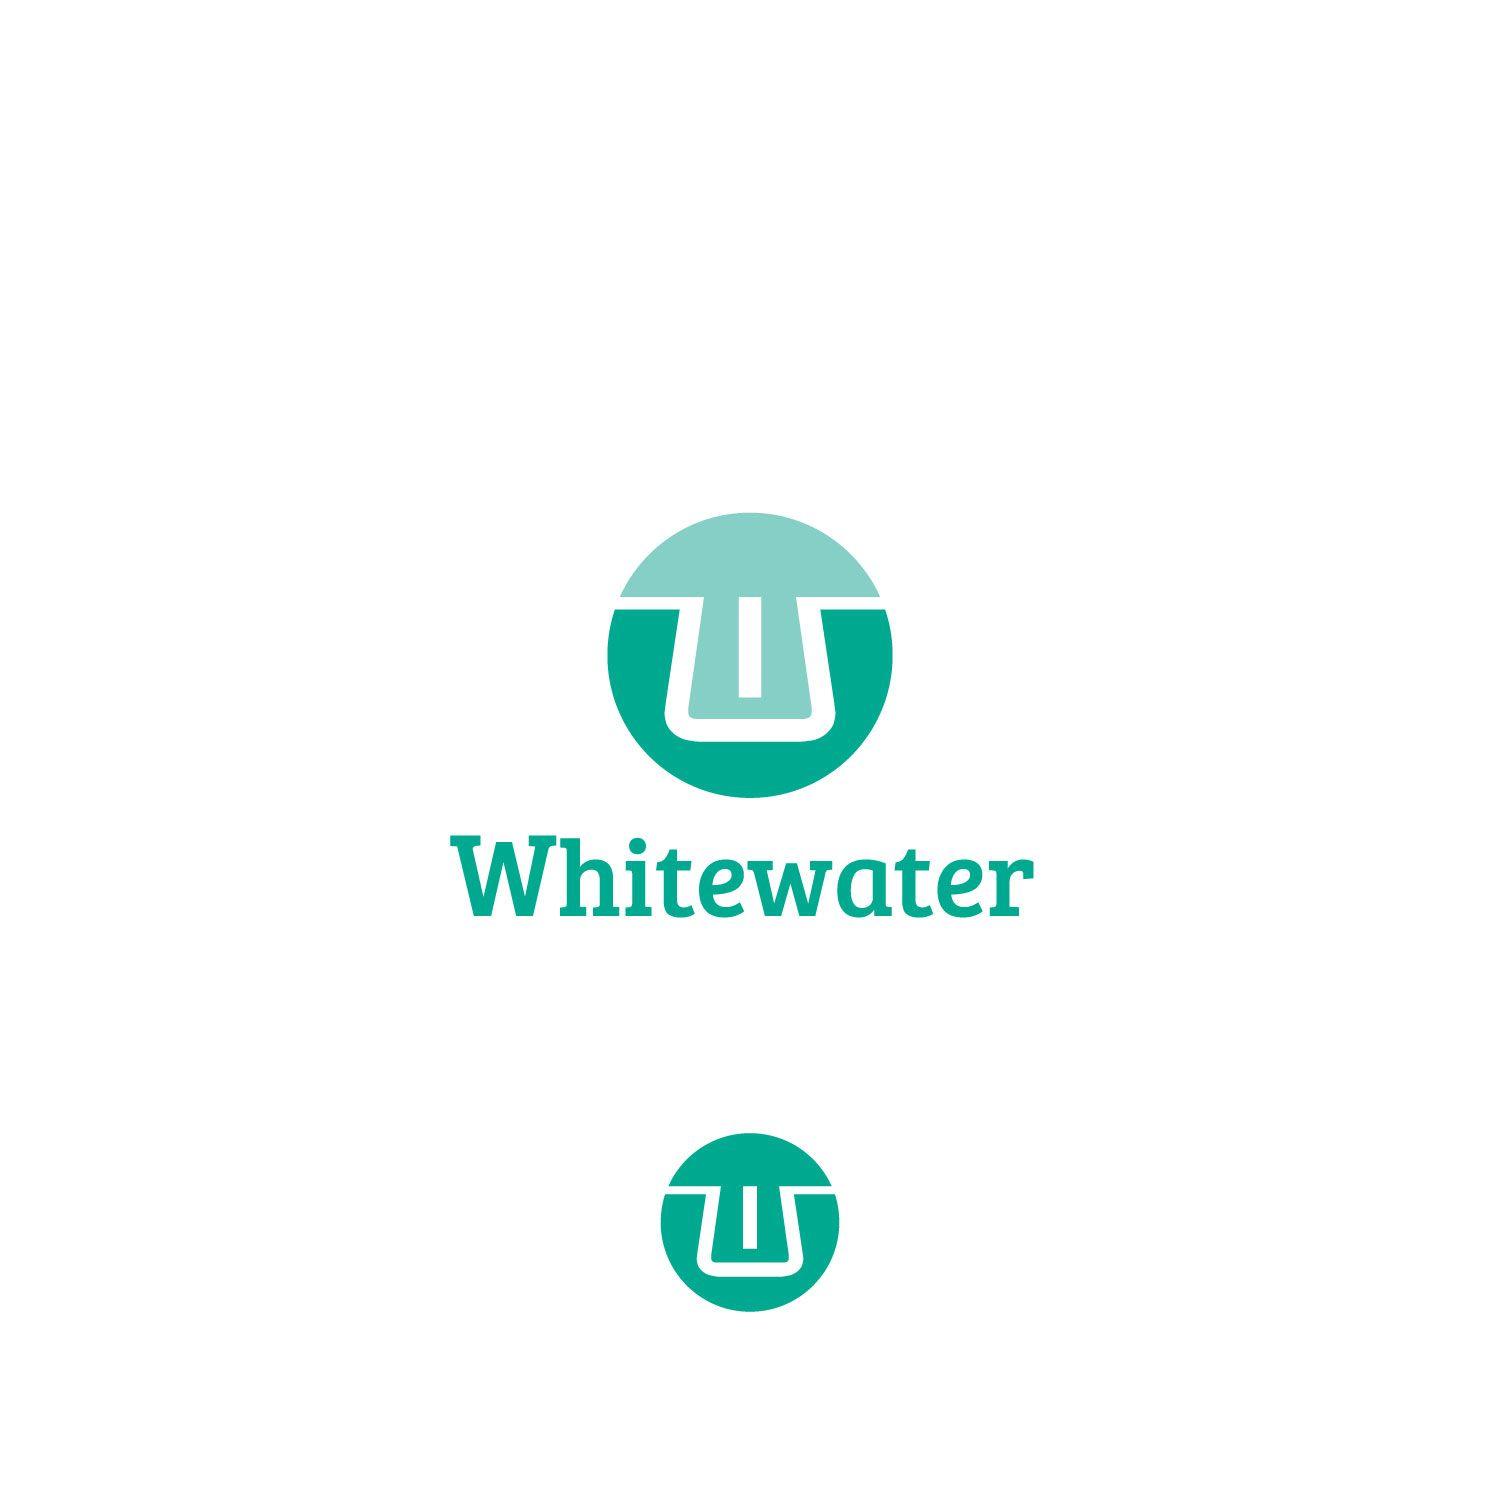 Whitewater Company Logo - Upmarket, Playful, Business Logo Design for Whitewater & W